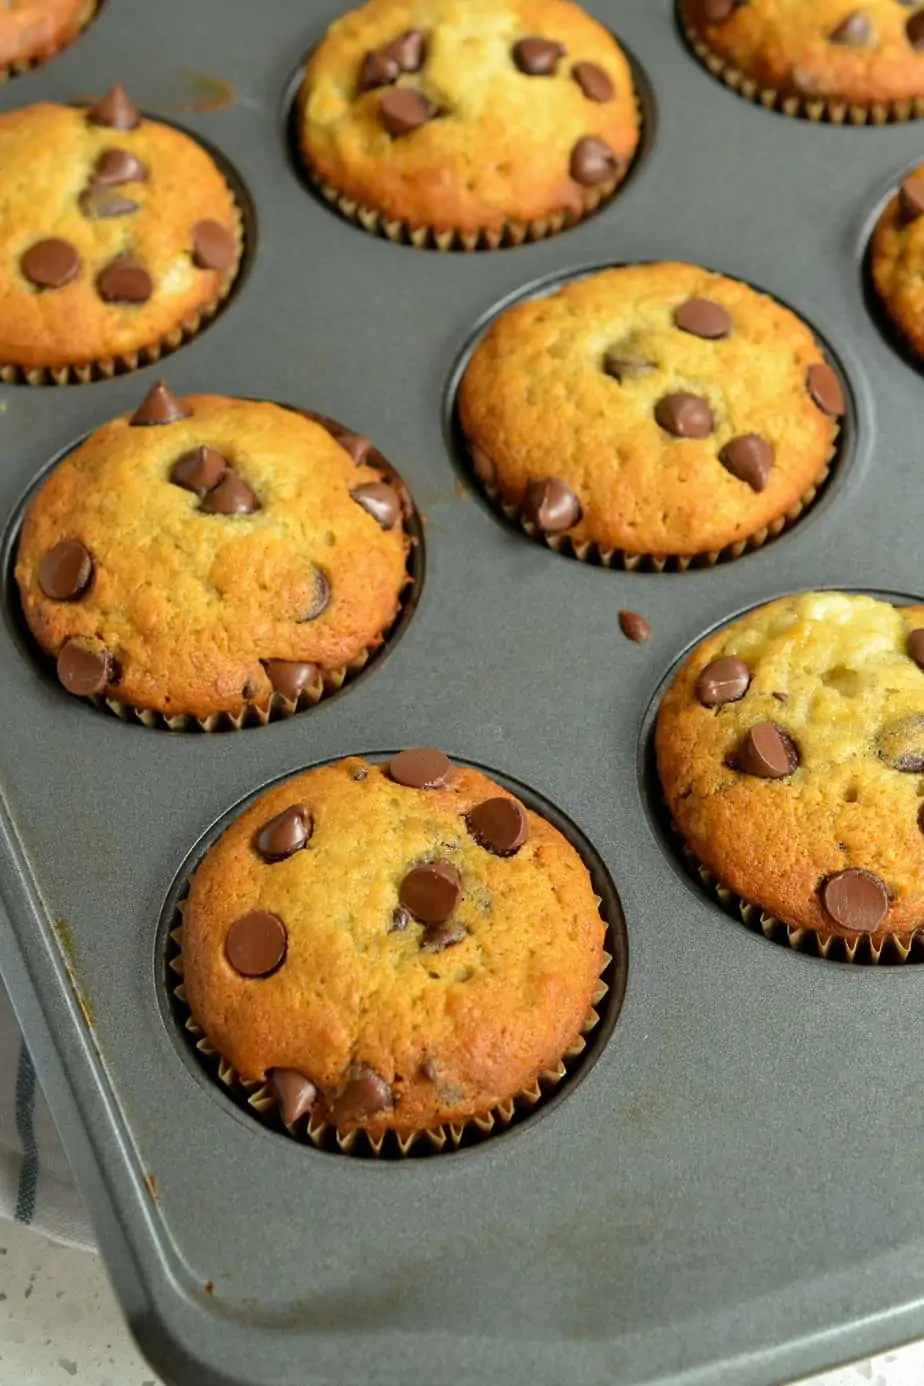 Warm chocolate chip muffins right out of the oven in a muffin tin.